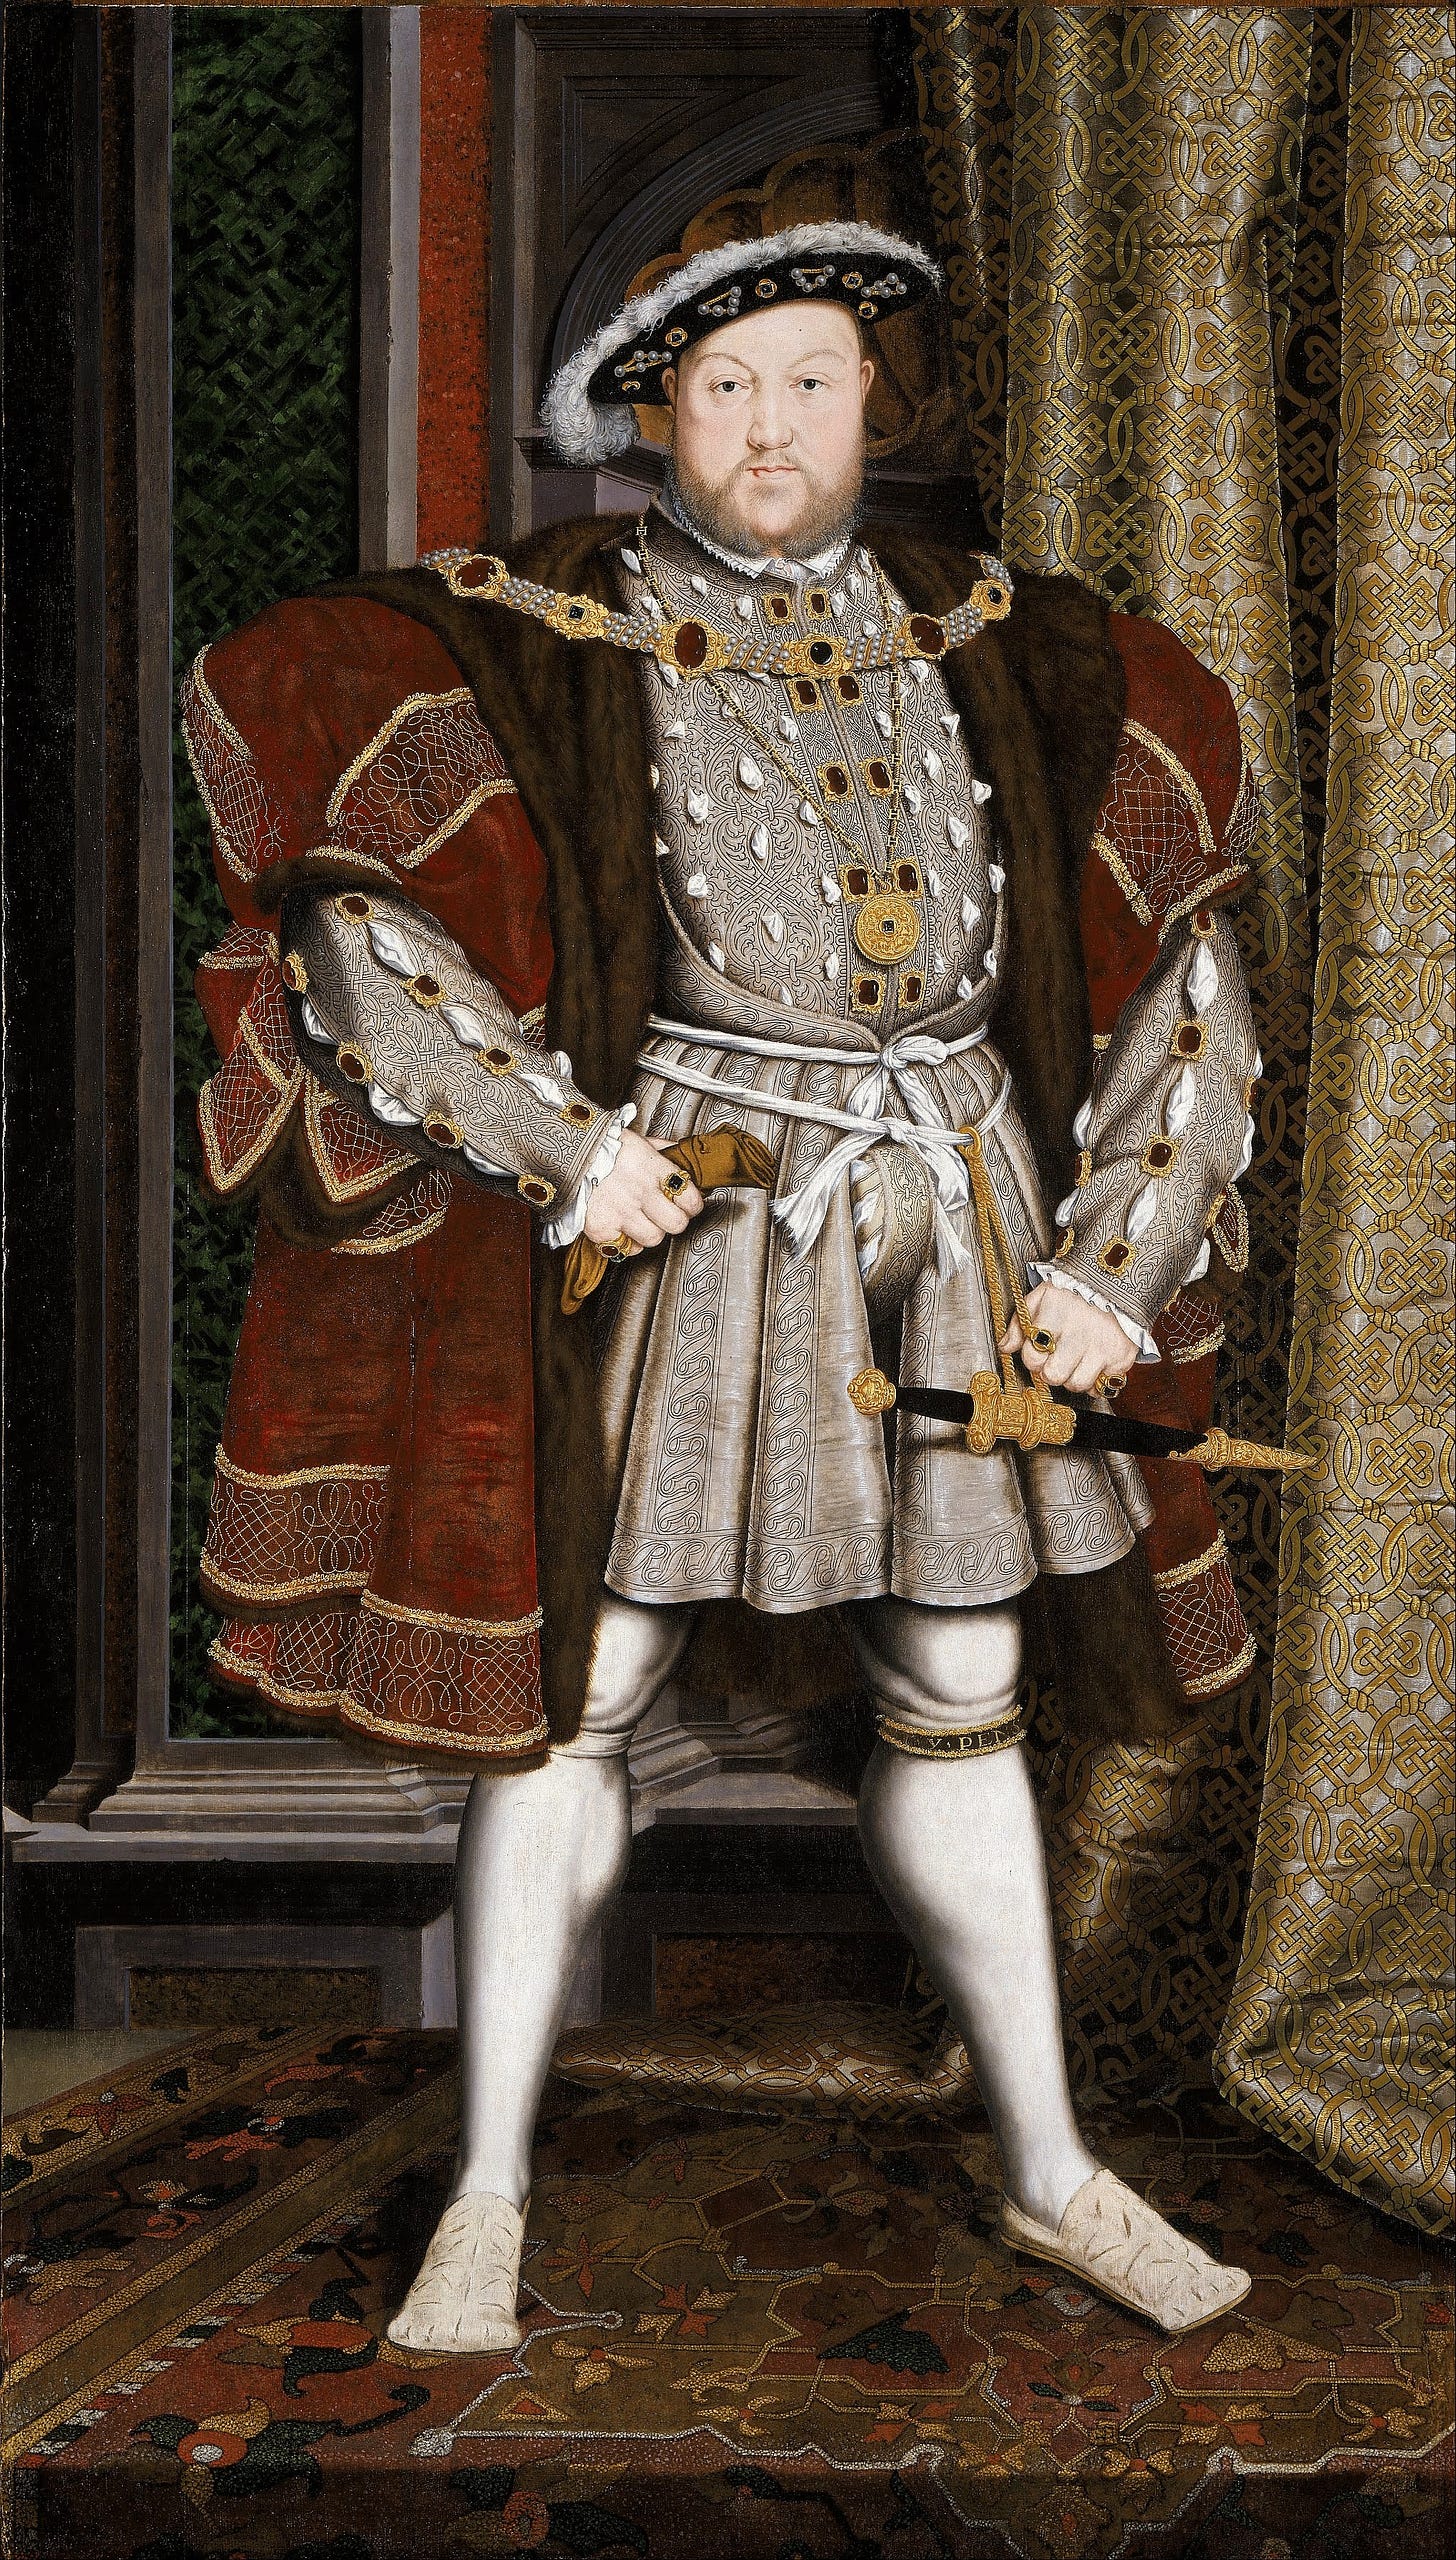 A portrait of King Henry VIII. He stands proudly in front of an ornate background. He wears a silver doublet and a scarlet jacket. He wears other signs of power including a ruby, gold, and pearl chain, a prodding codpiece, and other ornamentation. He holds himself proudly and carries a dagger, clearly a man at the height of his power.